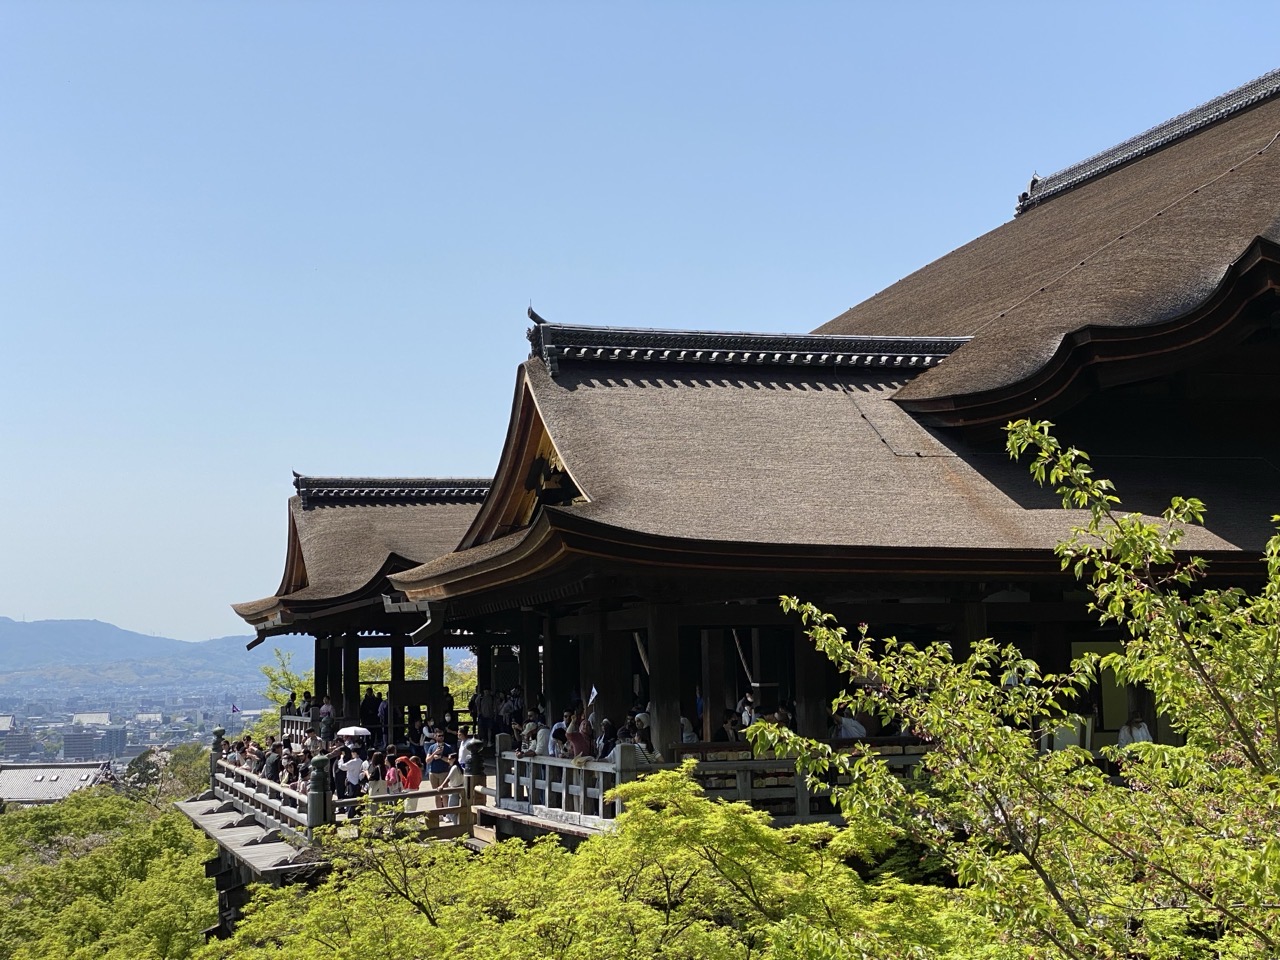 Kiomizu-dera on the edge of the hill with a blue sky in the background